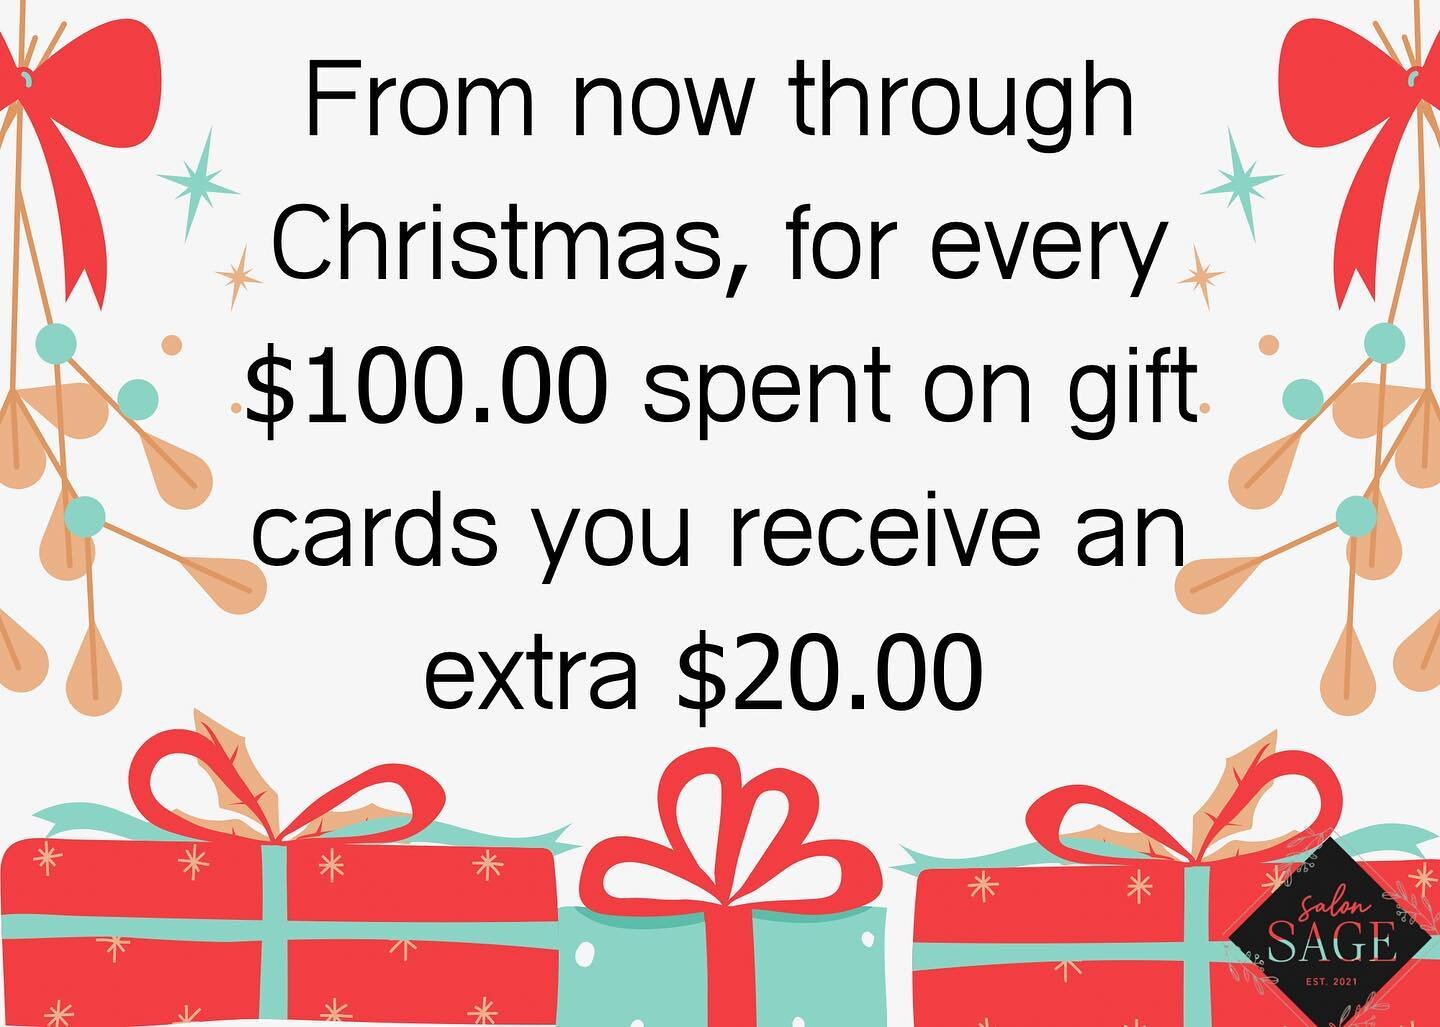 Holiday season is right around the corner🎄
There&rsquo;s no better gift to give than the gift of pampering. From now through Christmas, when you spend $100.00 on gift cards you receive an extra $20.00. Get your holiday gift cards today! 🎄🎁🎊

#sal